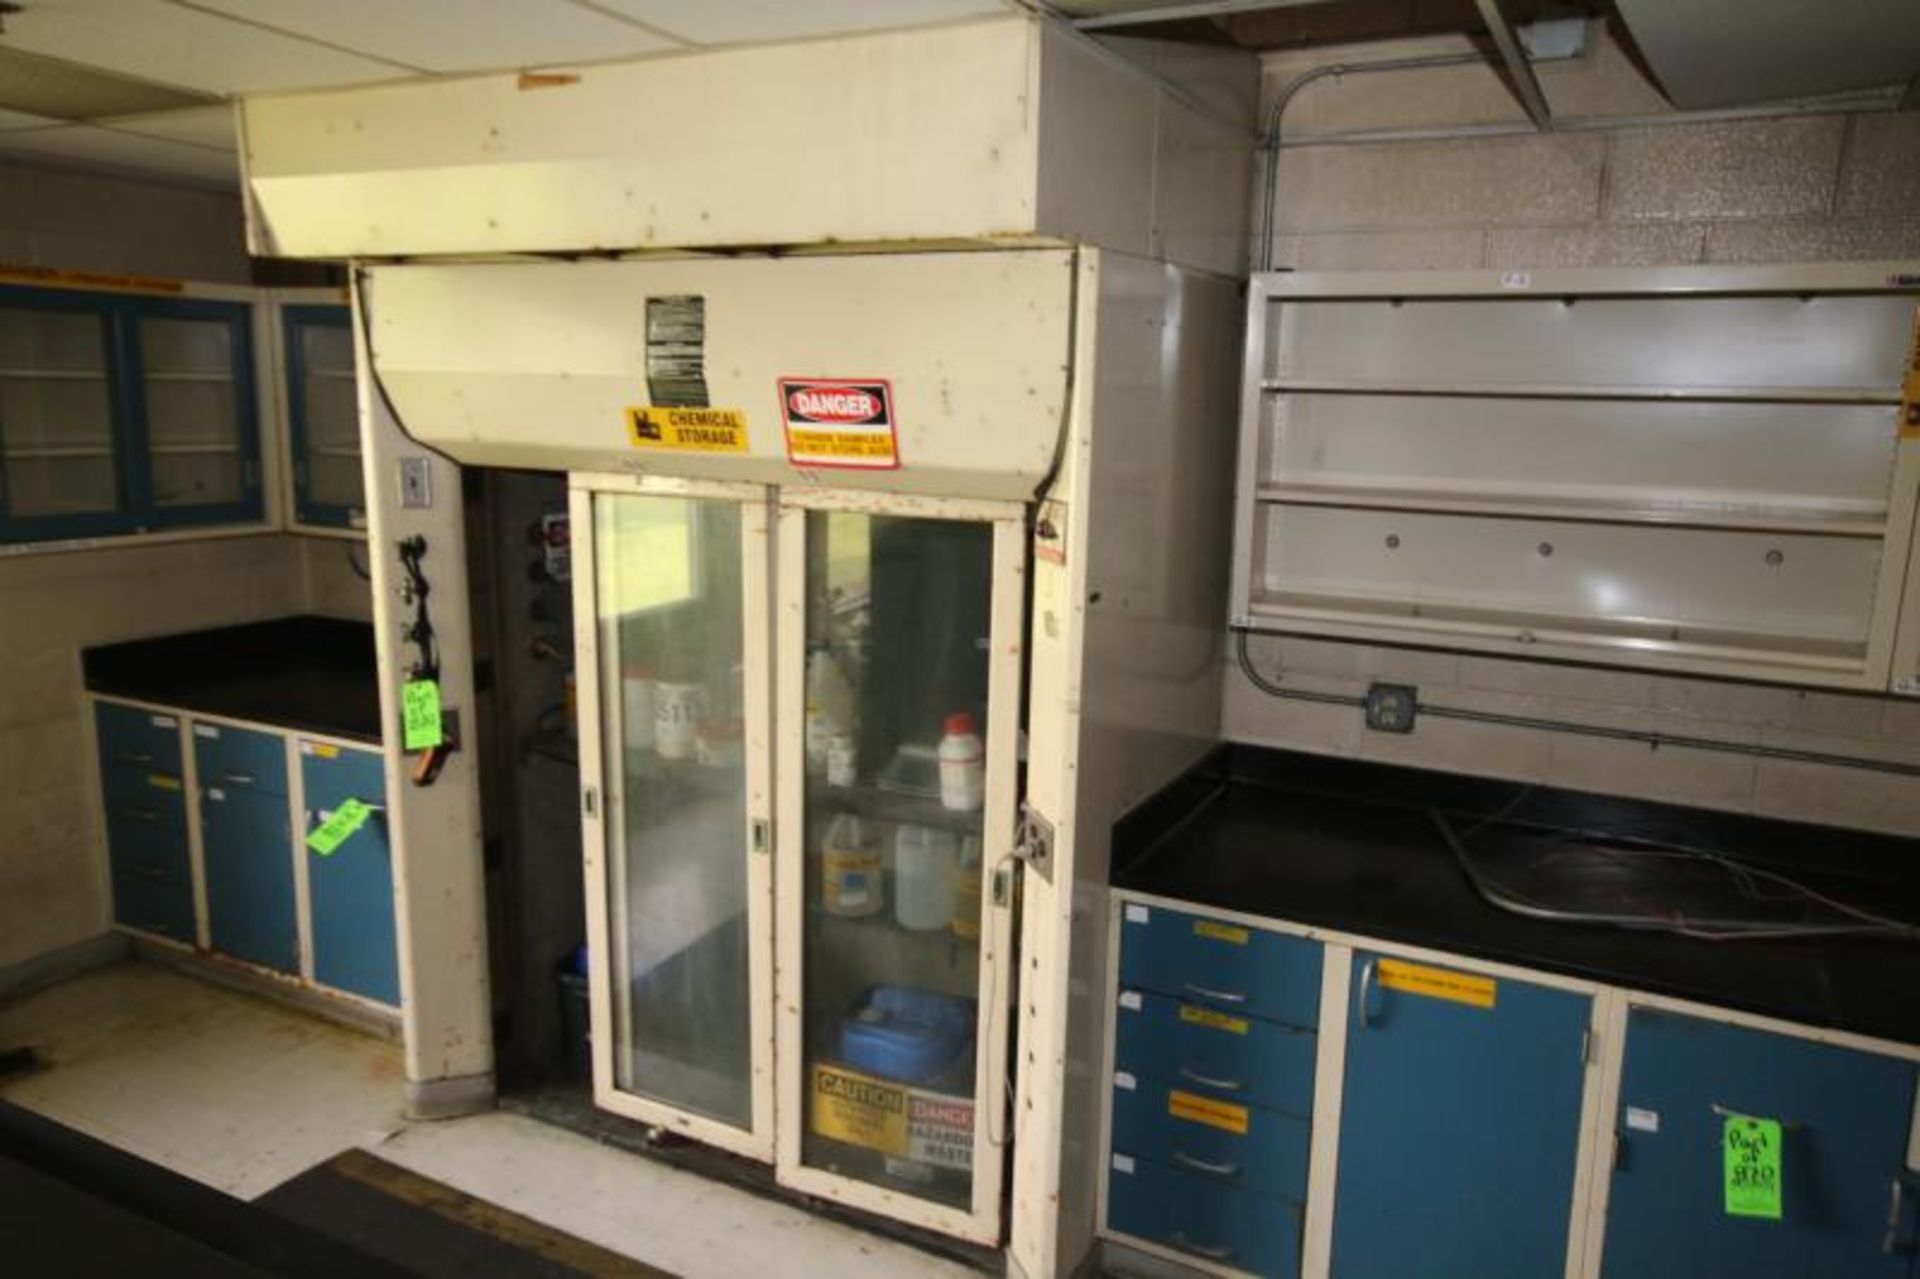 Lot of Assorted Lab Furniture in (2) Rooms, Includes (2) Lab Islands-14' L x 54" W and 160" L x - Image 6 of 6